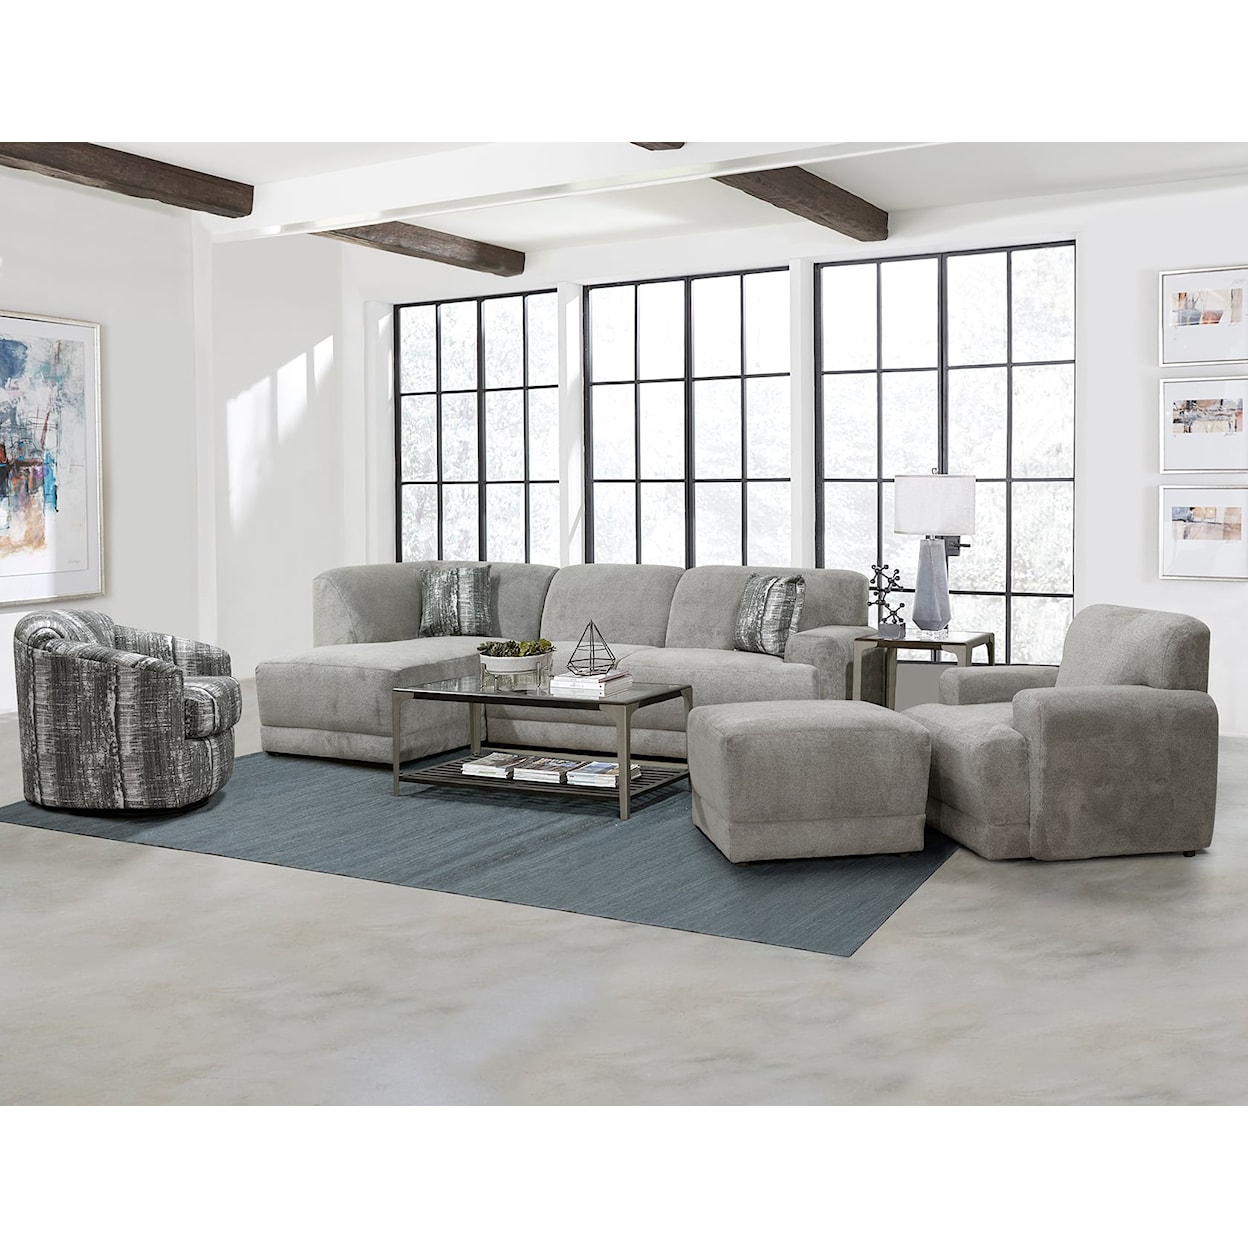 England 2880 Series Sectional Sofa with Left Facing Chaise